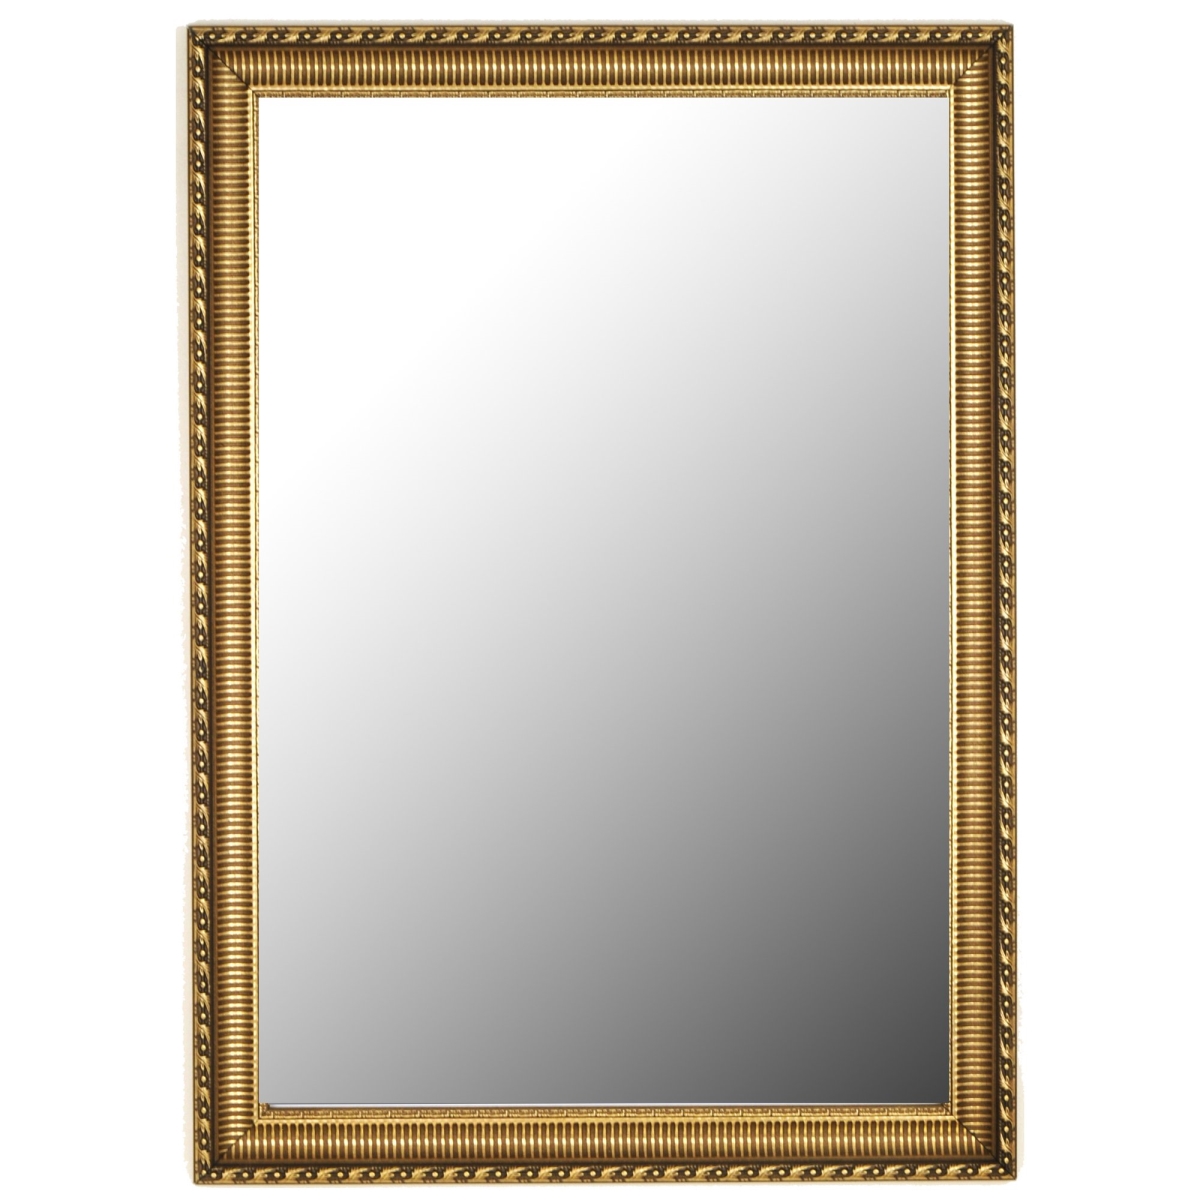 Hitchcock Butterfield 810000 Gold Gaultier Ornate Wall Mirror - 25.25 X 35.25 In.